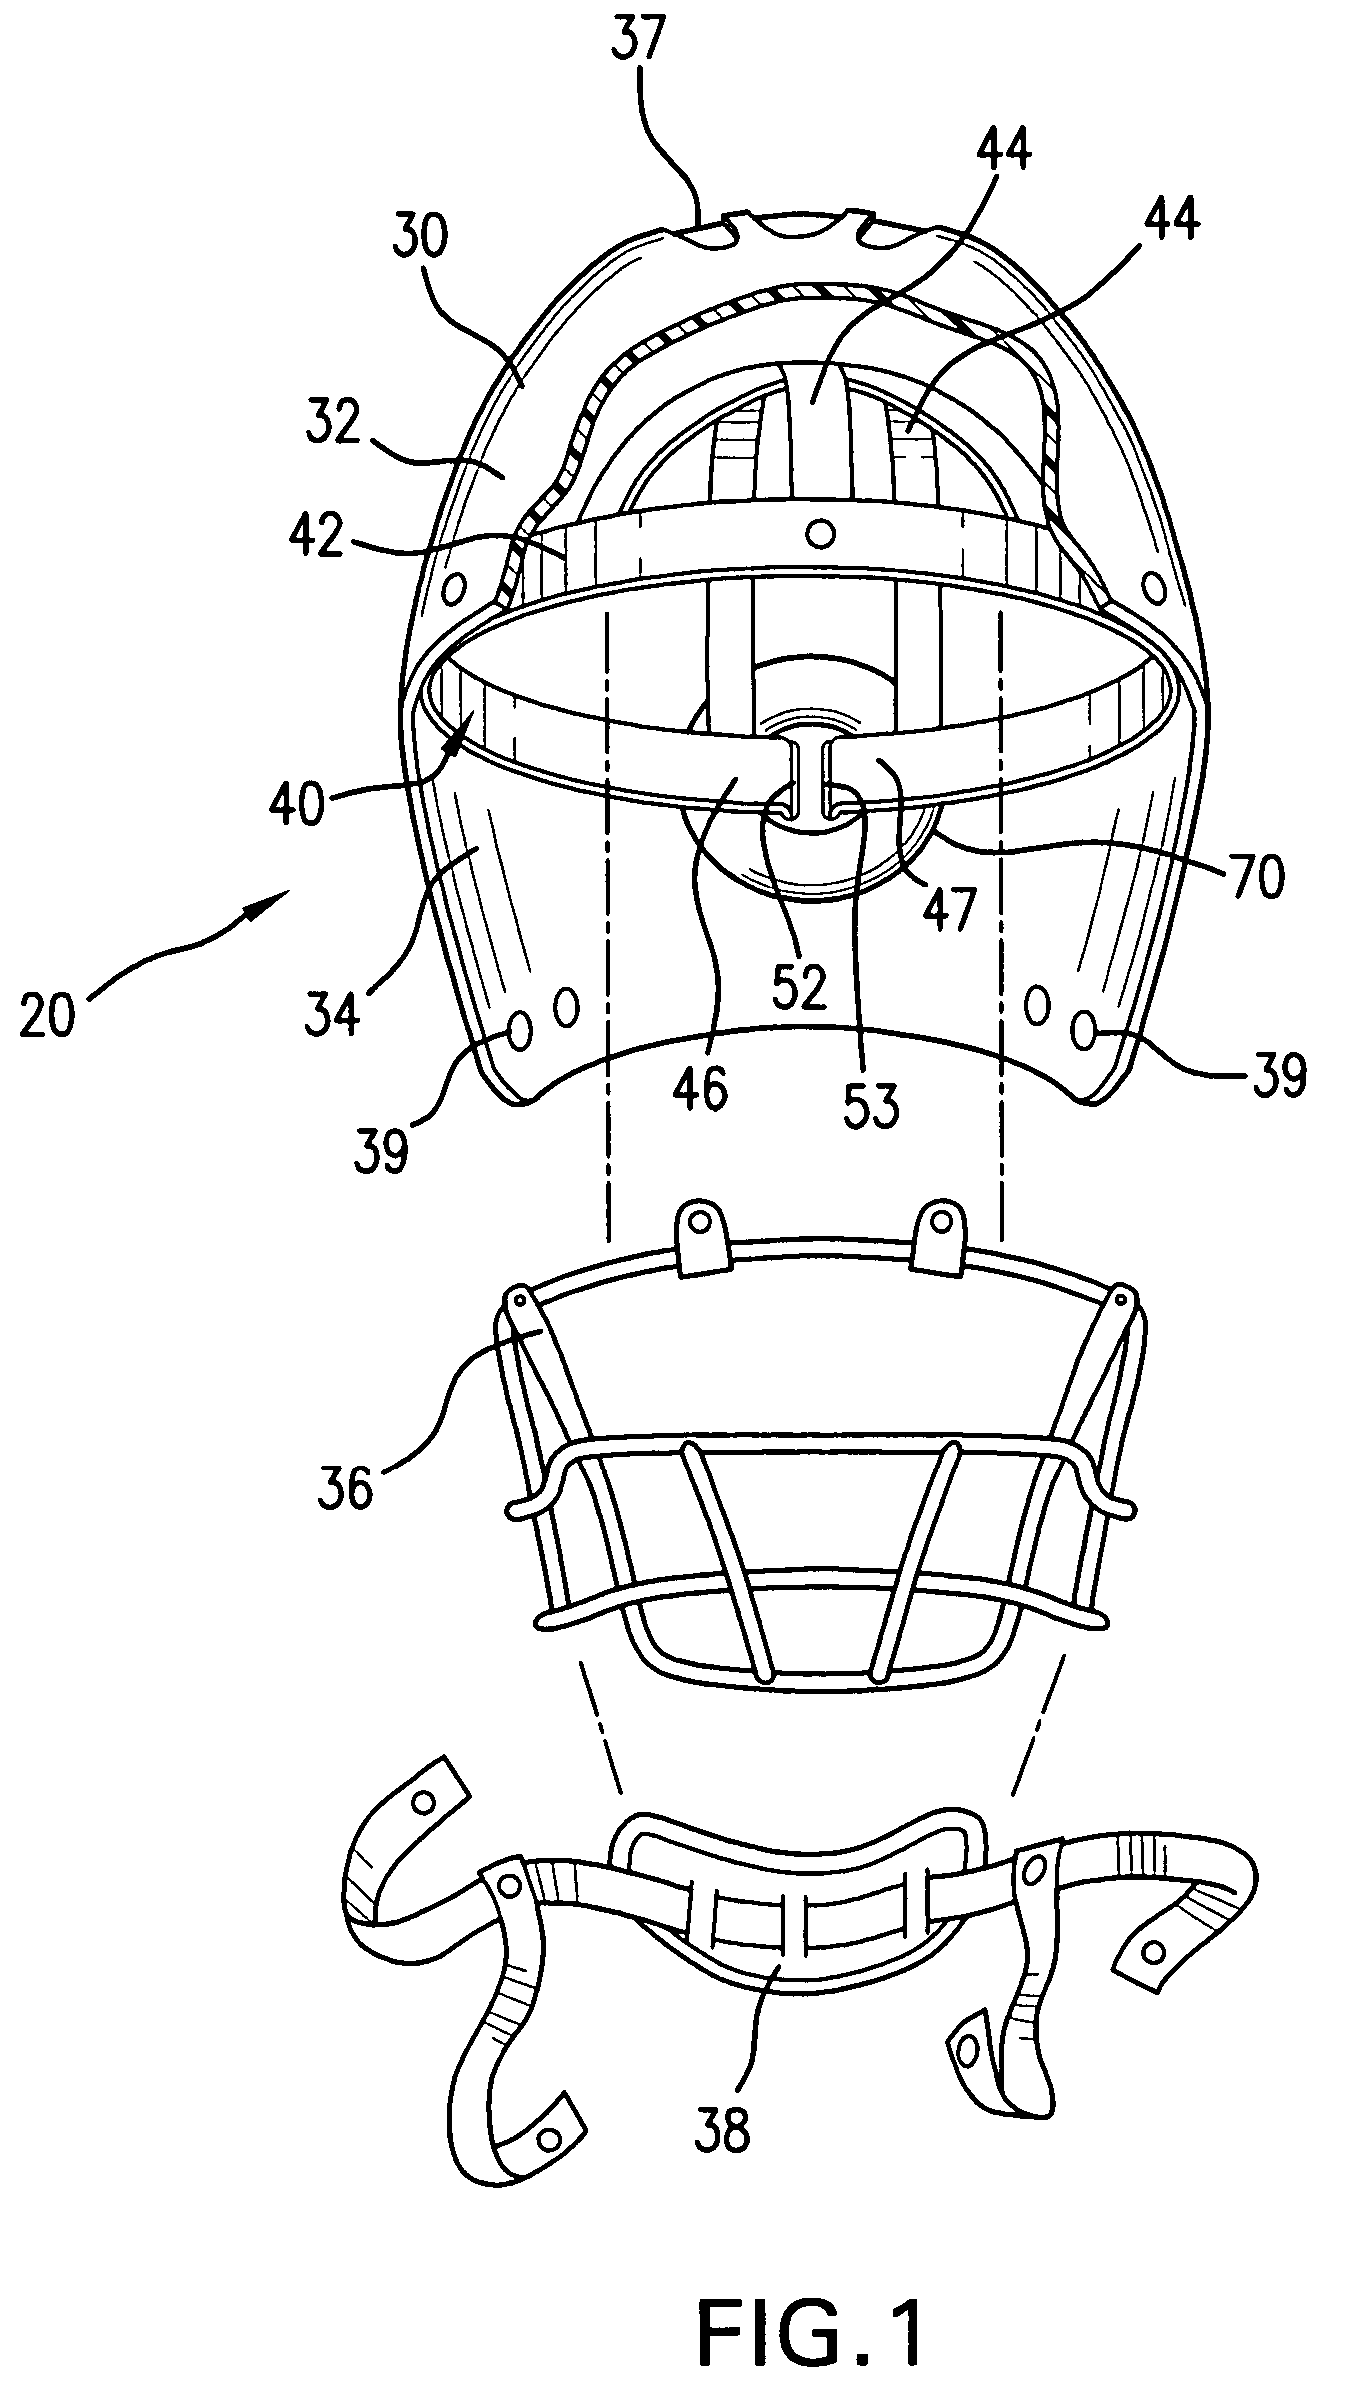 Protective helmet with adjustable support